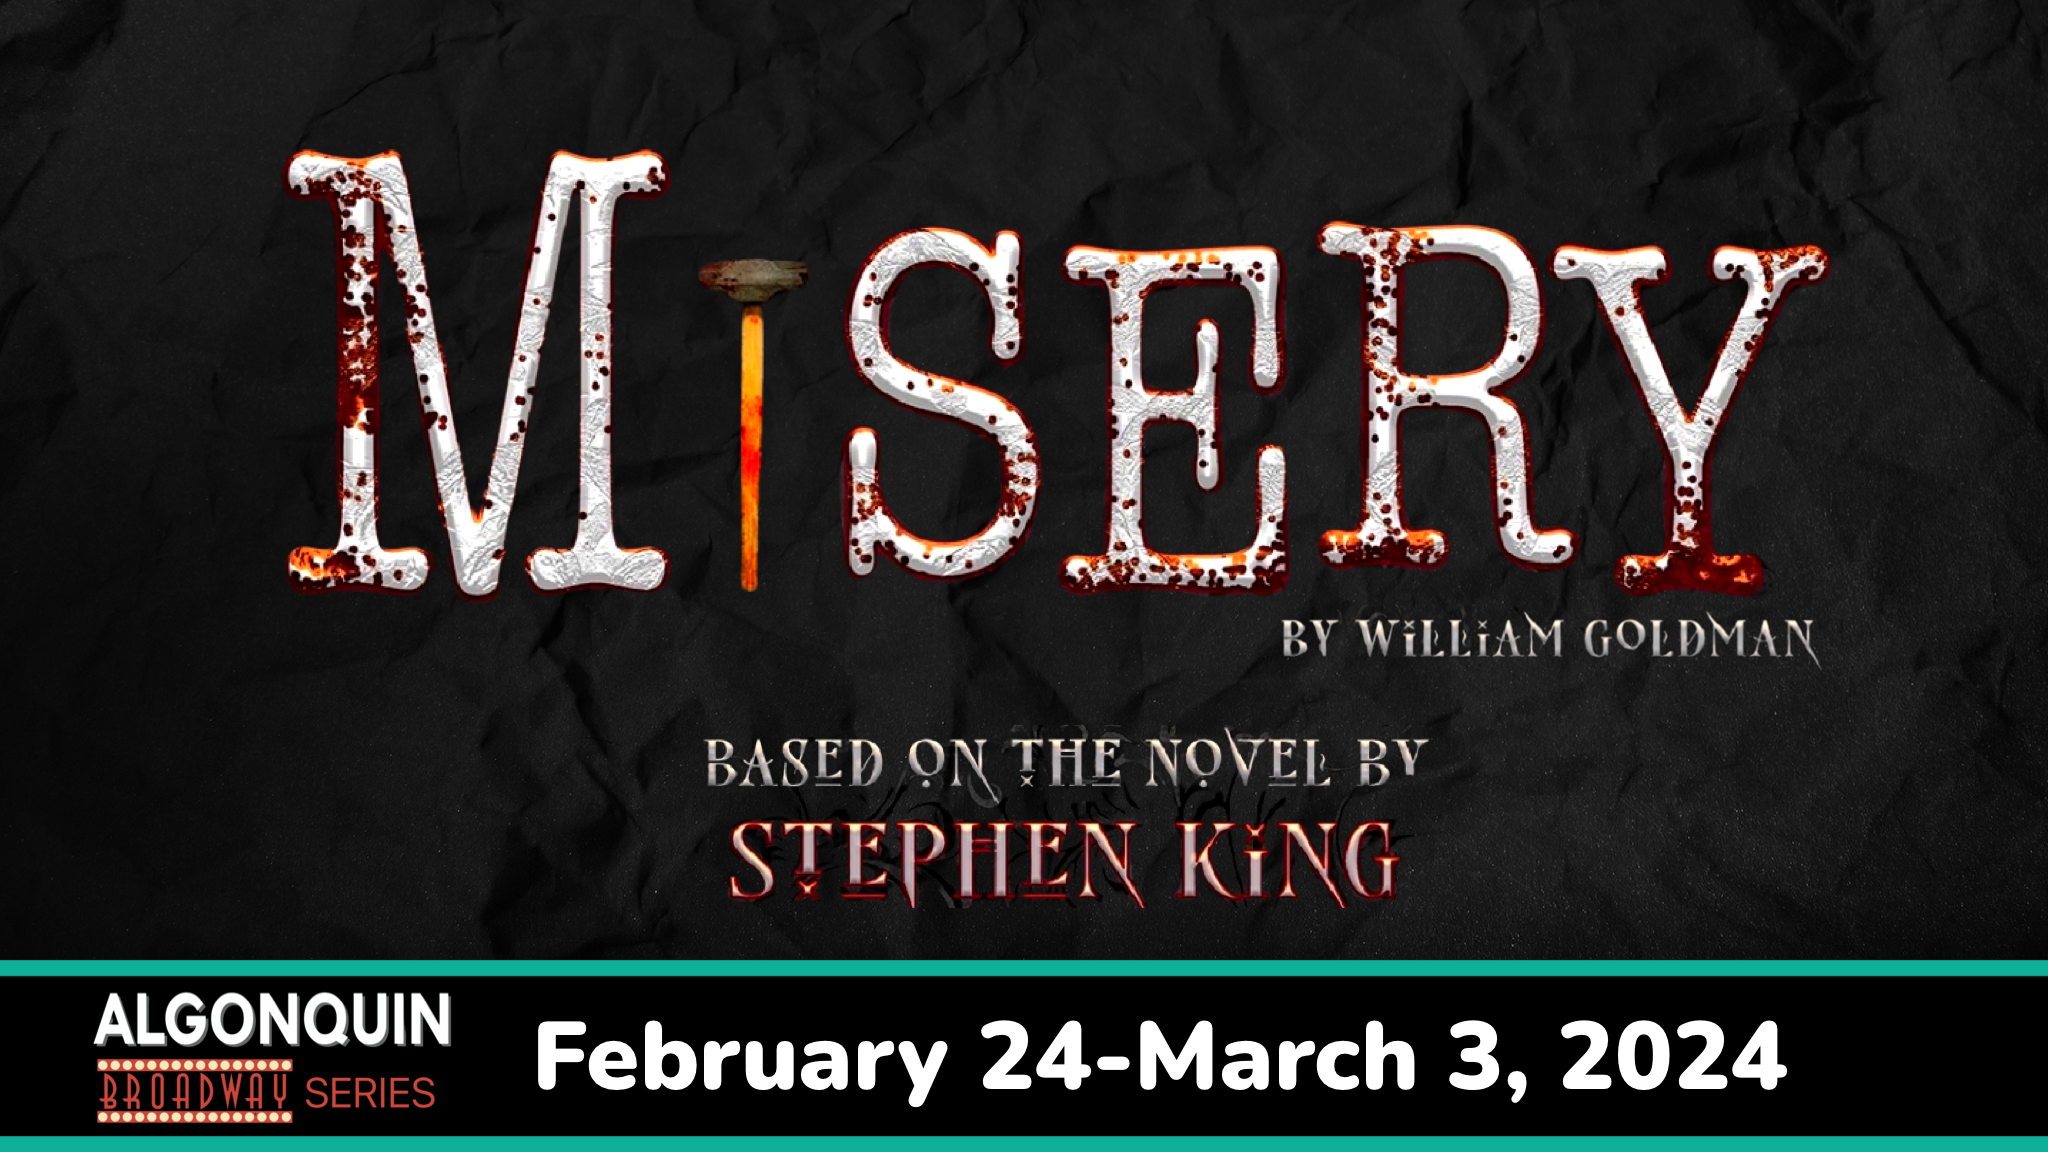 Algonquin Arts Theatre Announces Casting and Creative Team for MISERY, a play by William Goldman based on the Stephen King Novel